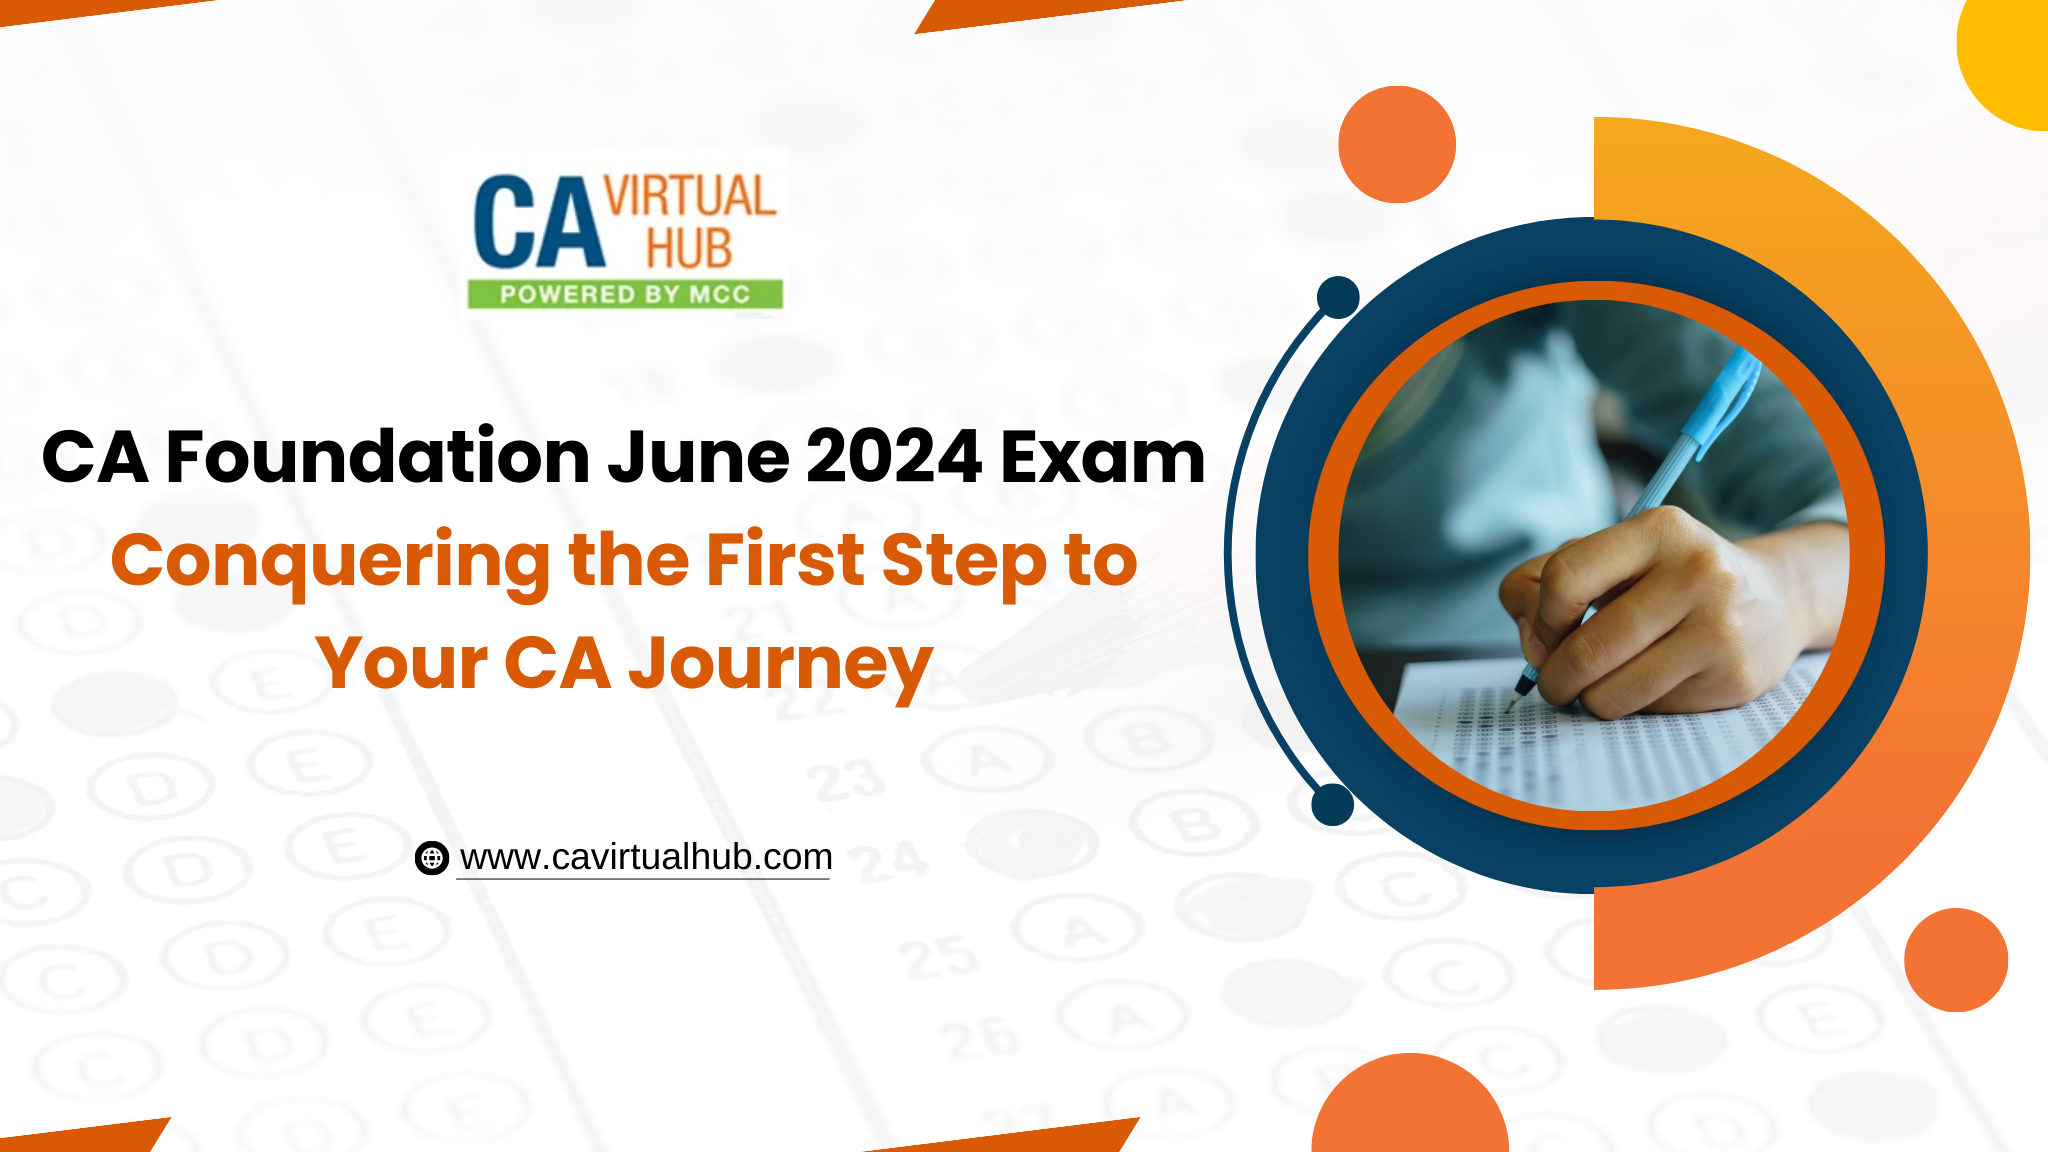 CA Foundation June 2024 Exam: Conquering the First Step to Your CA Journey